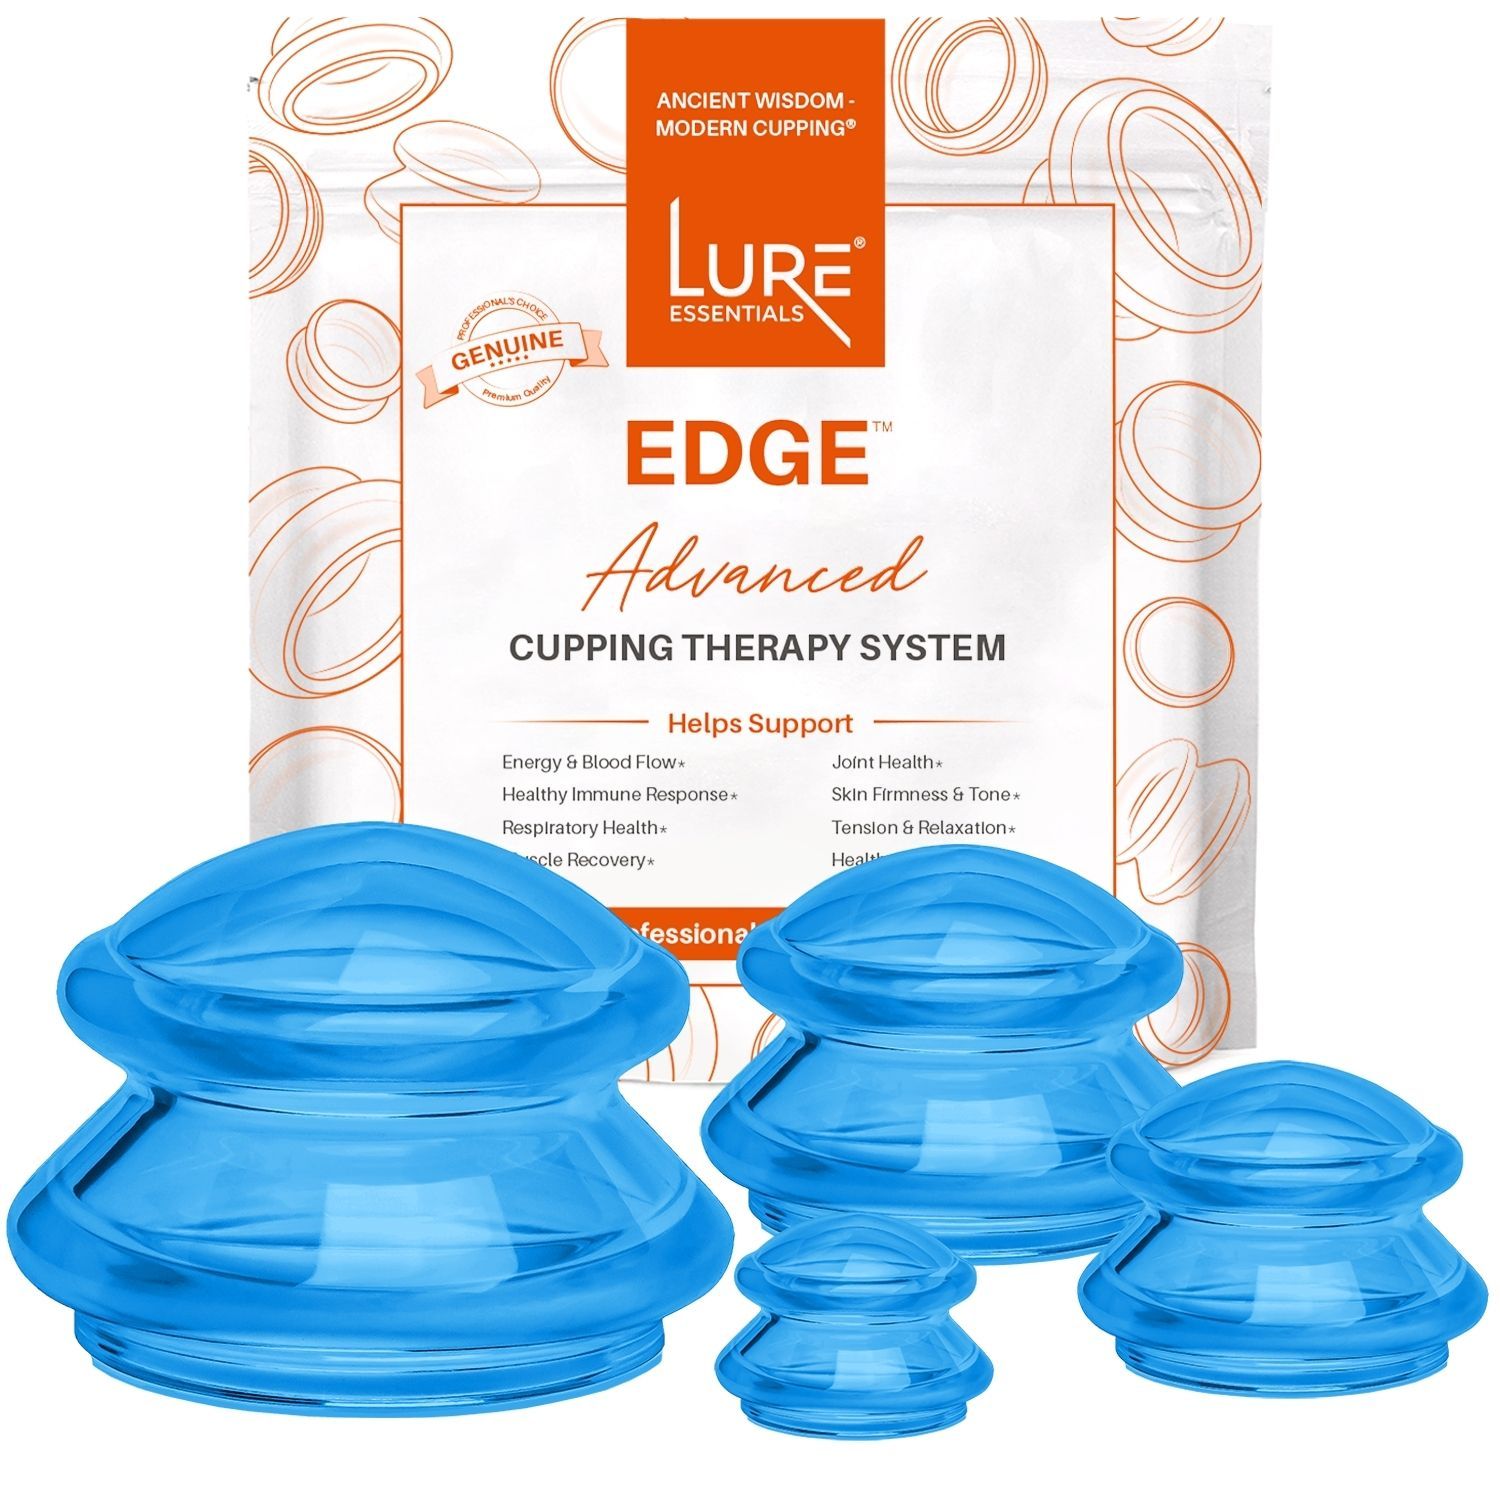 Lure Essentials Edge Cupping Set (8 Cups) Ultra Clear Blue Silicone Cupping  Therapy Set for Cellulite Reduction and Myofascial Release - Massage  Therapists and Home Use, Health & Nutrition, Massage Devices on Carousell